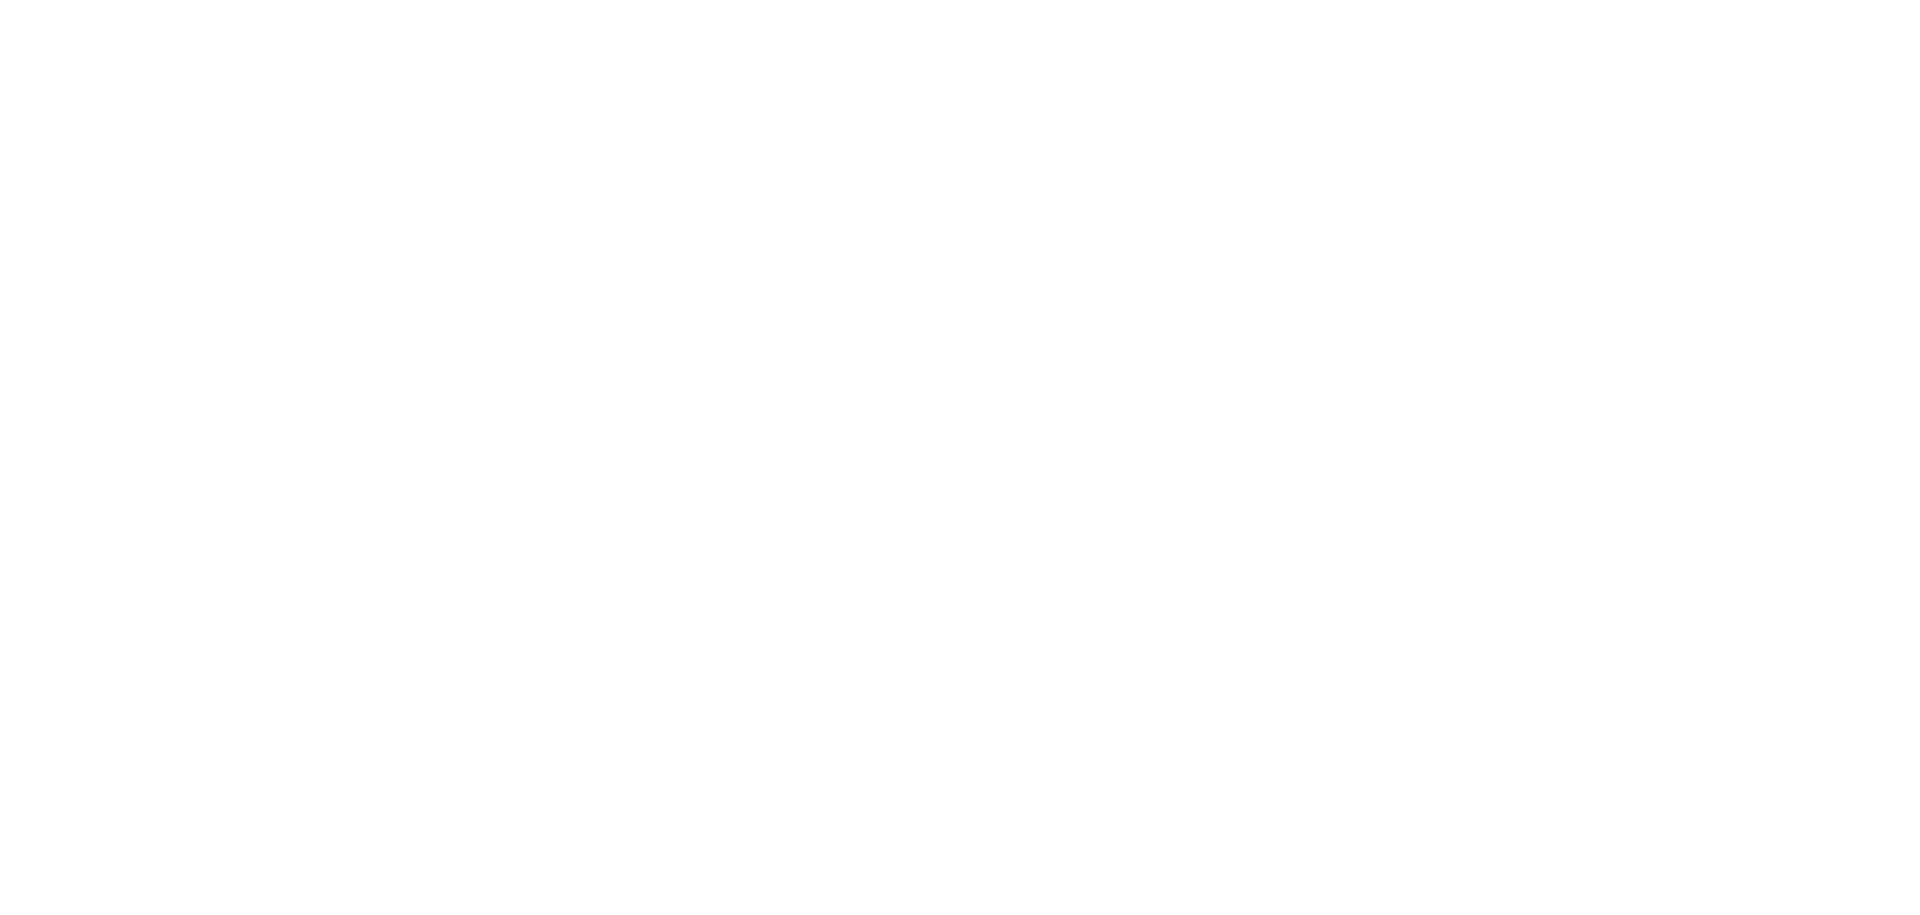 playful connections sandtray institute white logo on transparent background